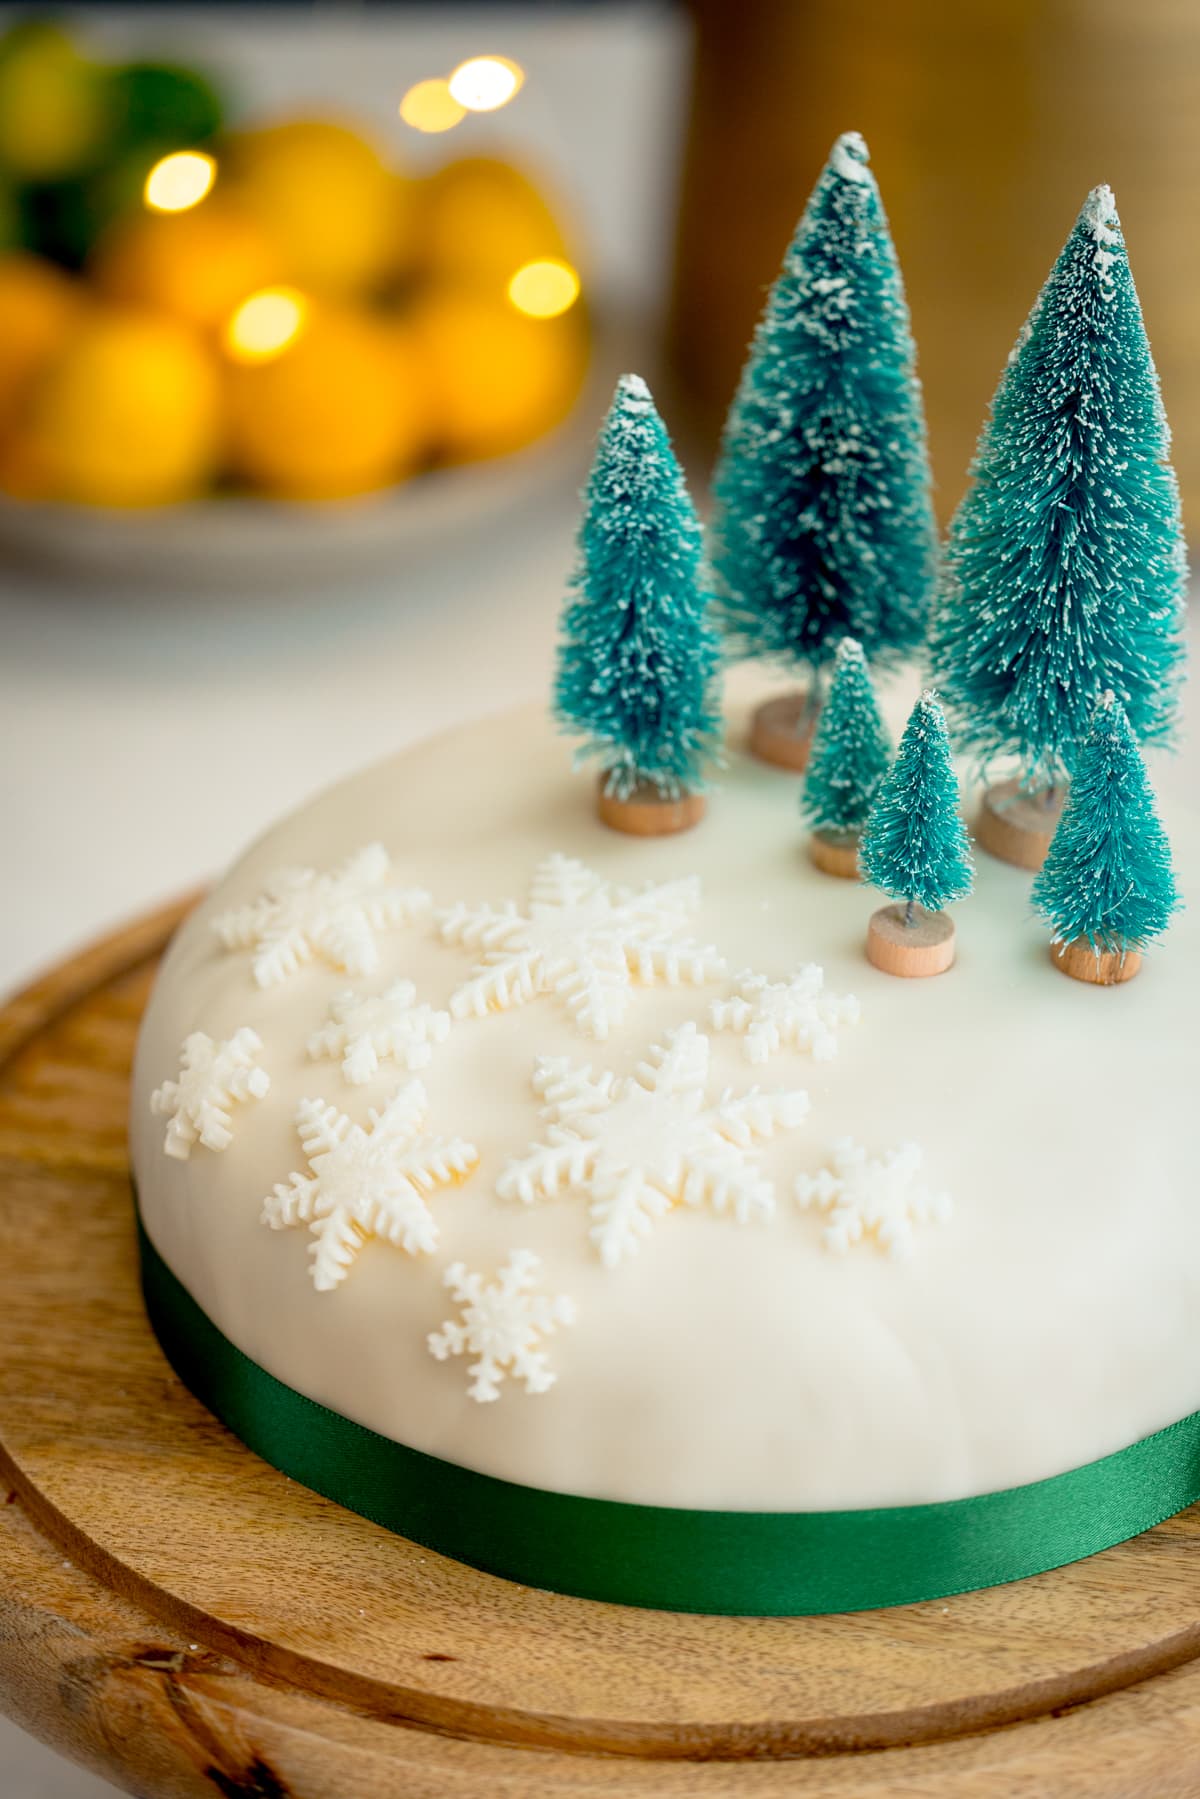 A close-up image of a simple decorated Christmas cake - with a green ribbon surrounding the cake, white fondant snow flakes and mini Christmas trees on top. The cake is on a wooden cake stand on a kitchen surface with glowy lights and a bowl of fruit in the background.